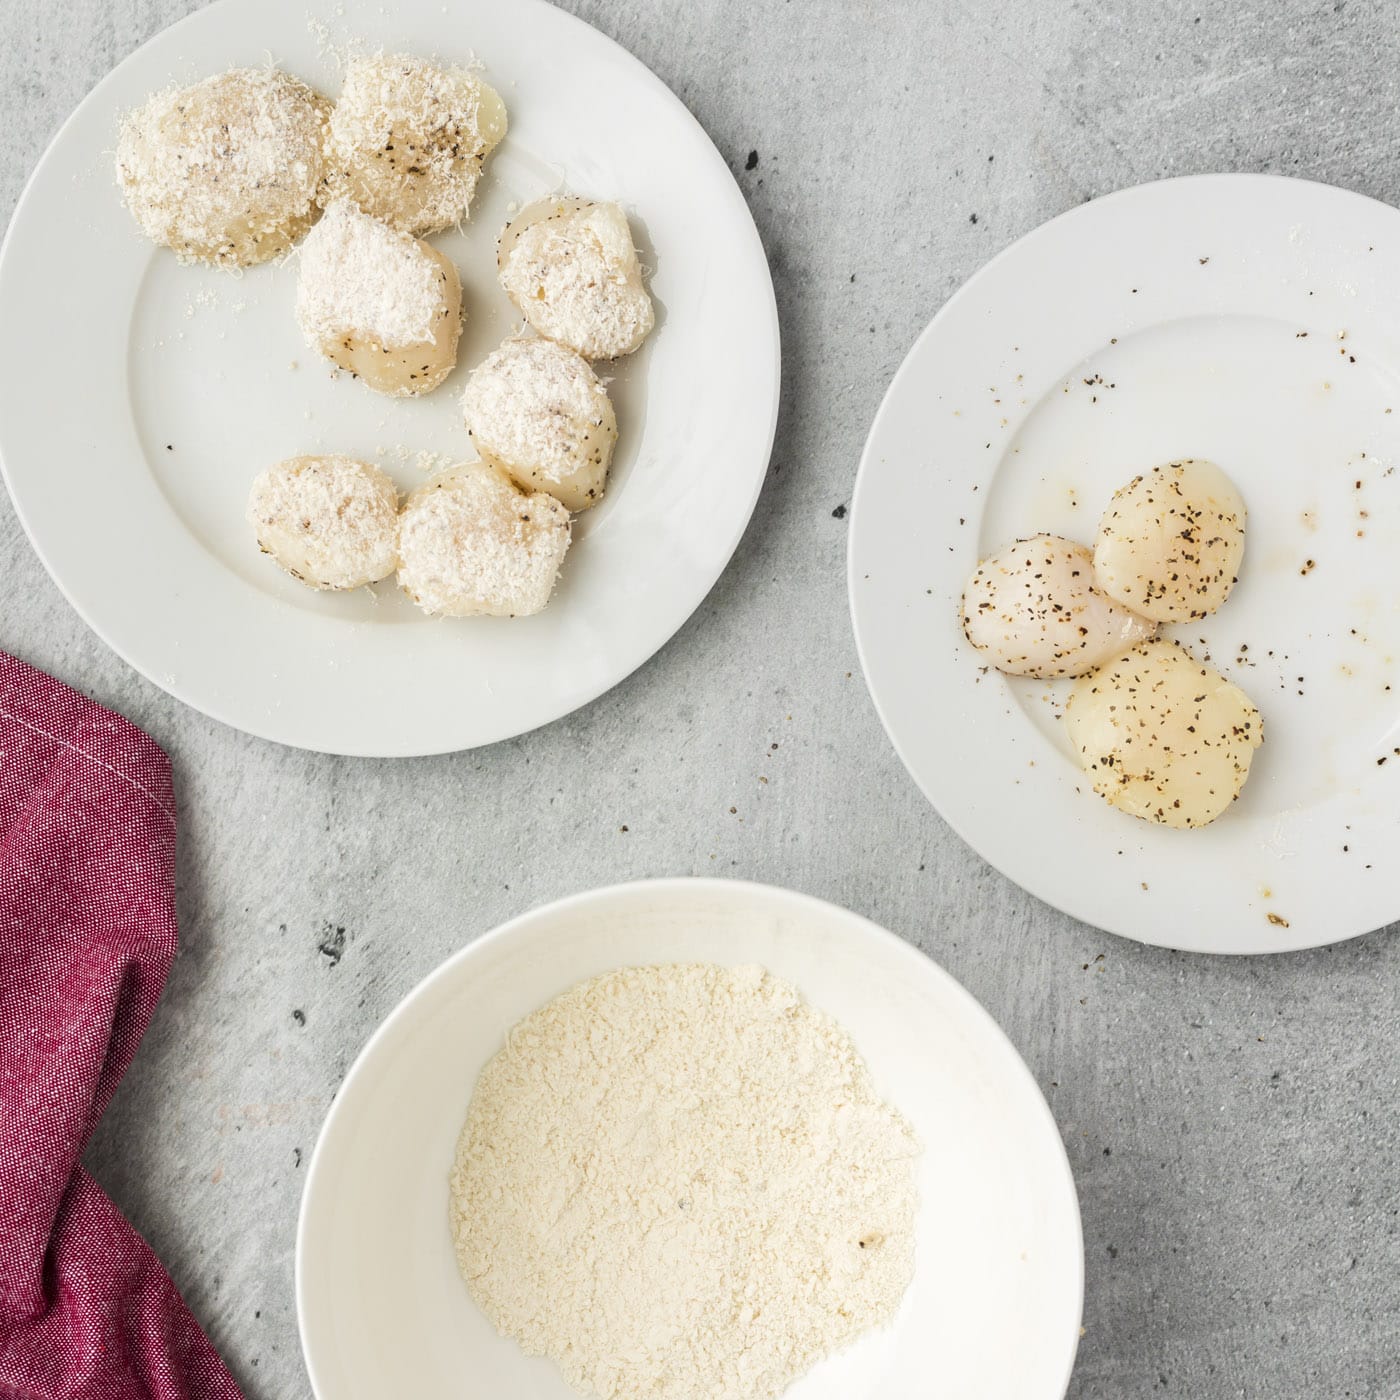 placing scallops in parmesan and flour mixture